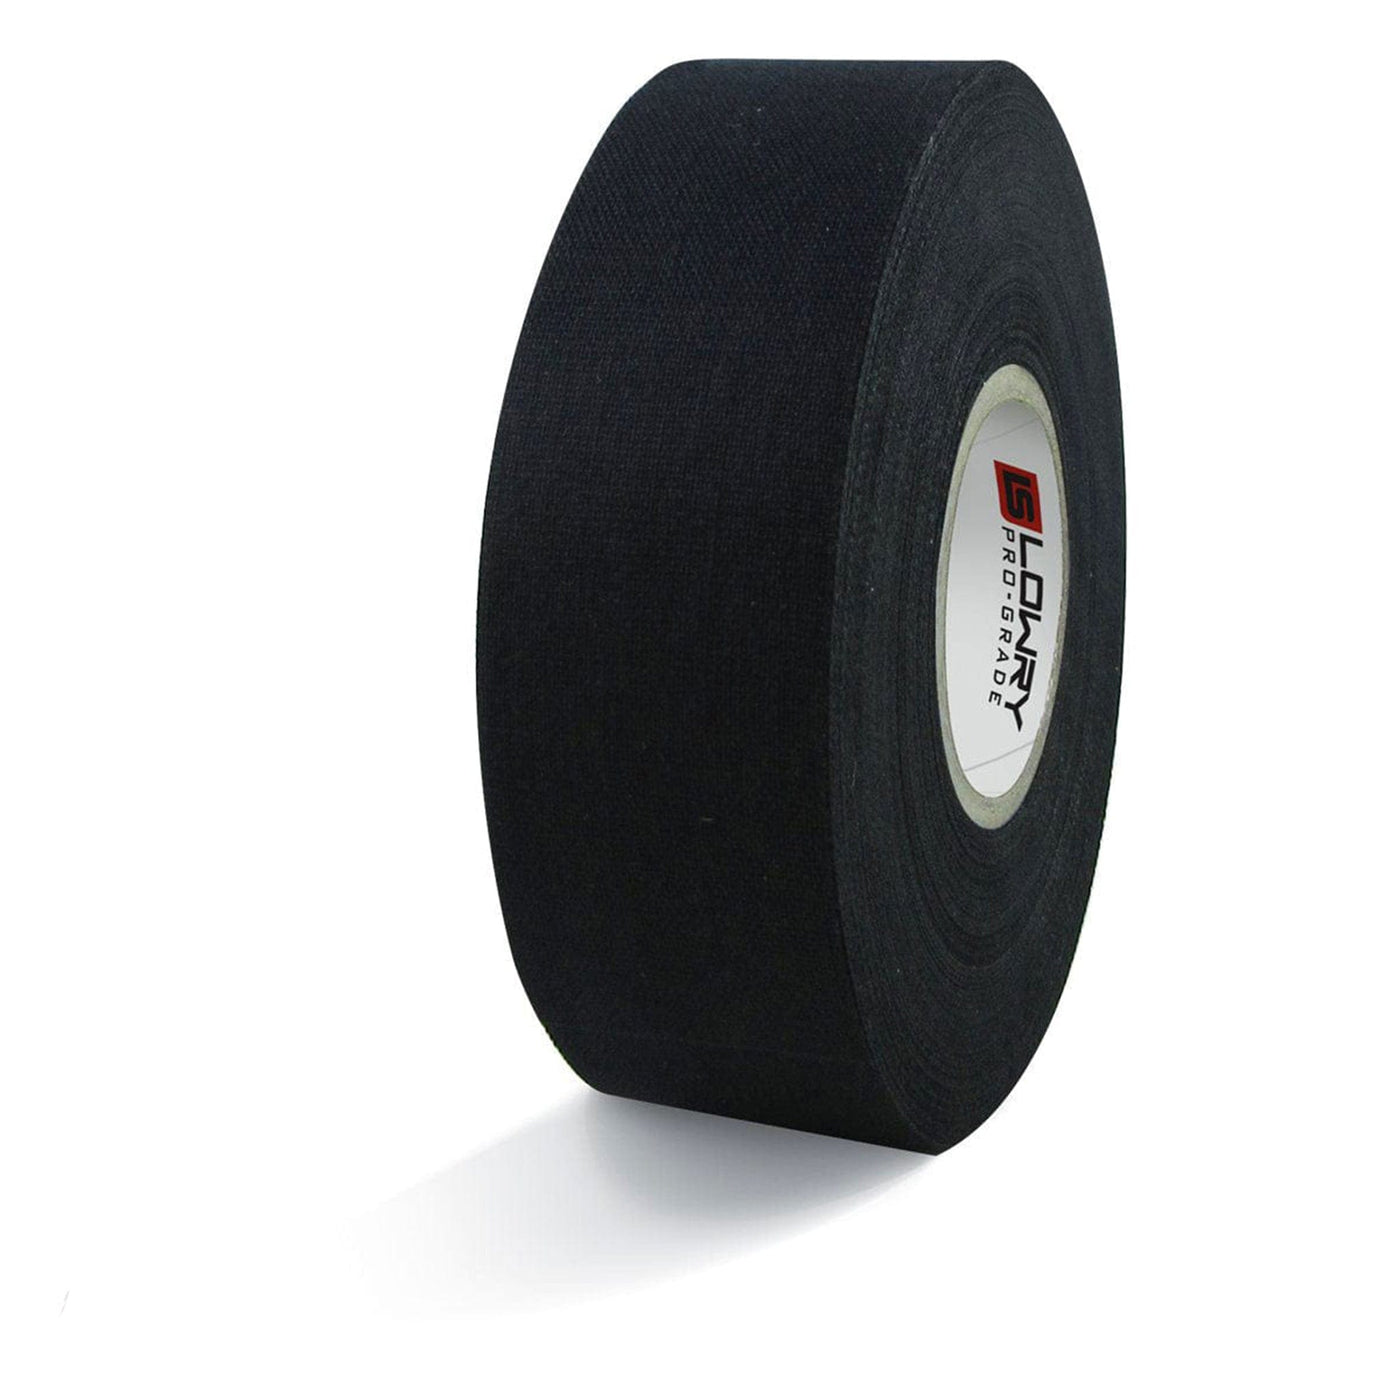 Lowry Sports Pro-Grade Black Hockey Stick Tape - Large Roll - The Hockey Shop Source For Sports